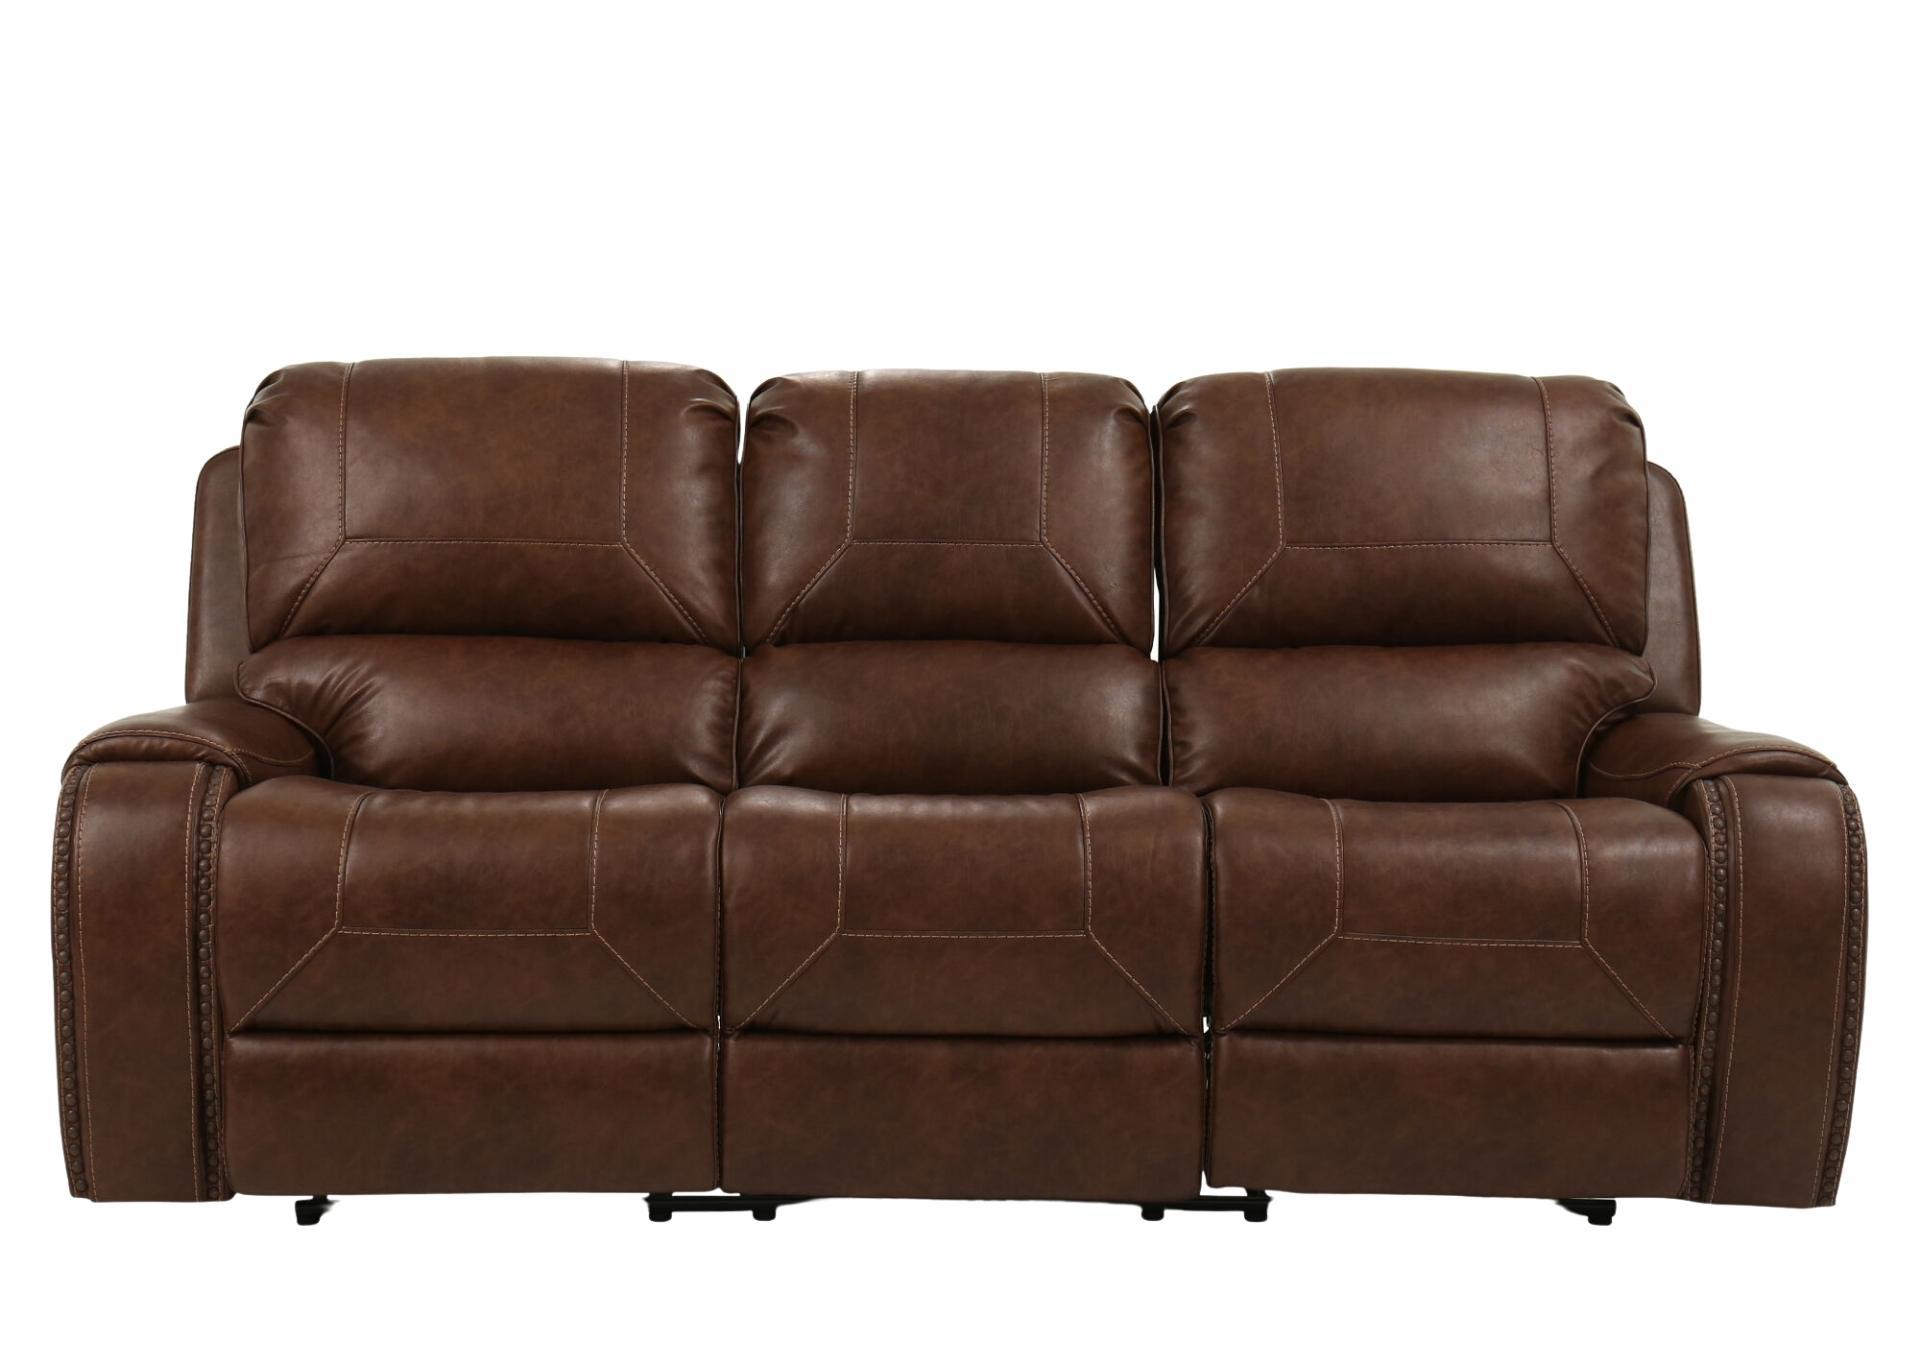 KEILY BROWN RECLINING SOFA WITH DROP DOWN TABLE